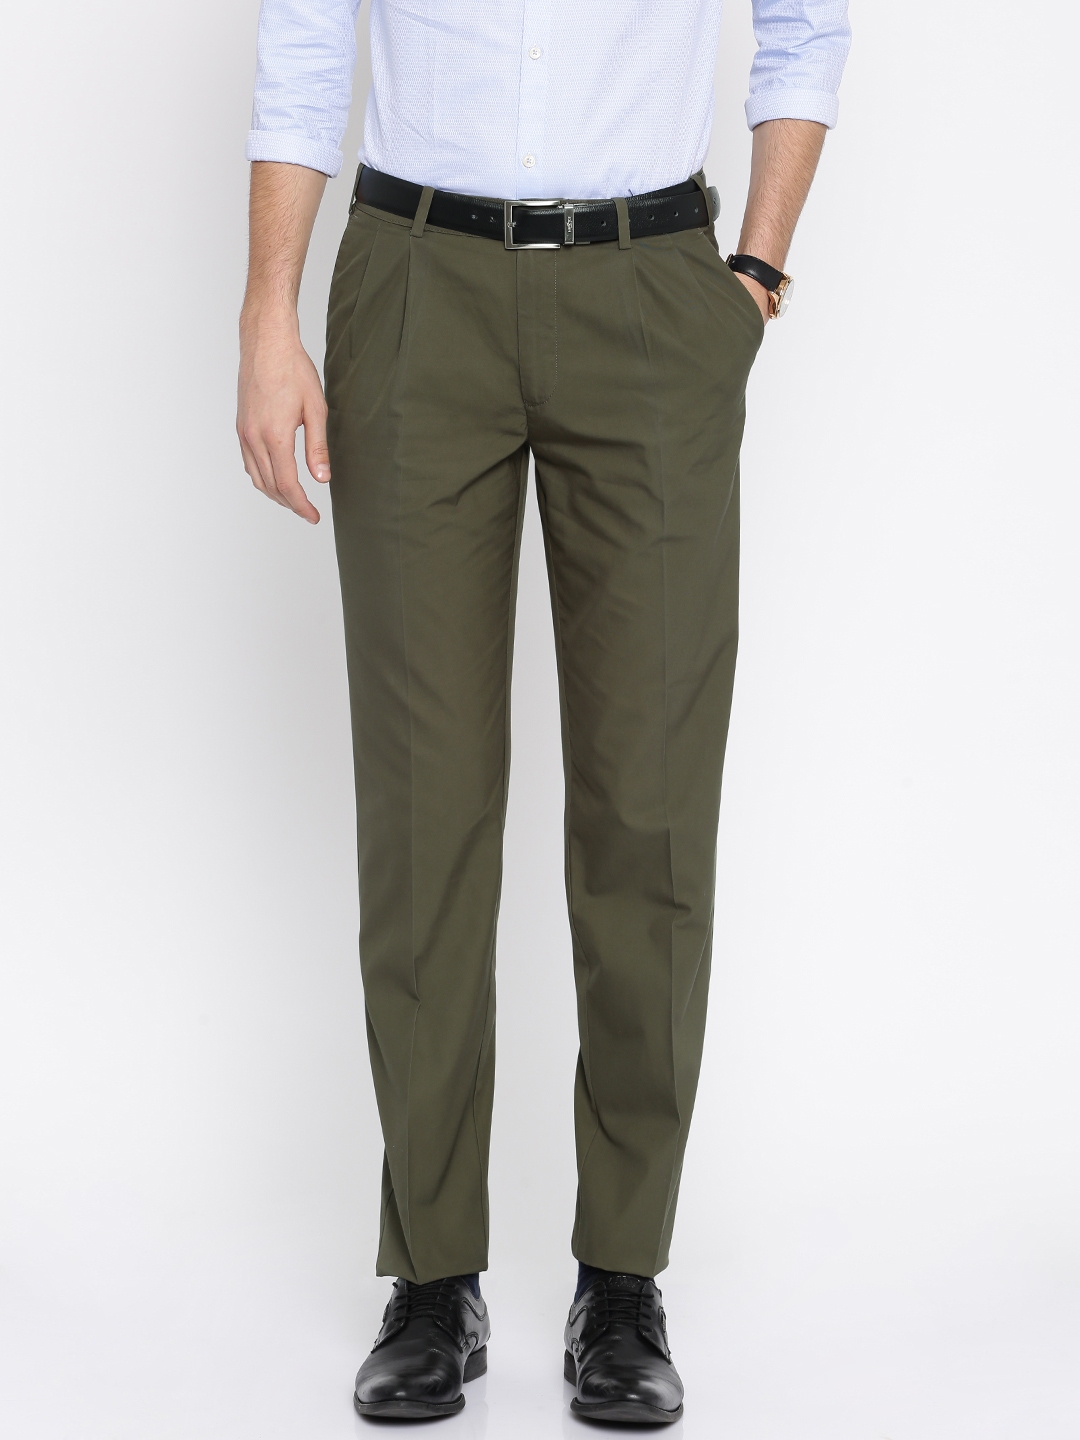 Buy men in class Olive Green Chinos Pants for Men Stretchable Slim Fit  Chinos for Men Slim fit Chinos Trousers for Mens Checked Chinos at Amazonin